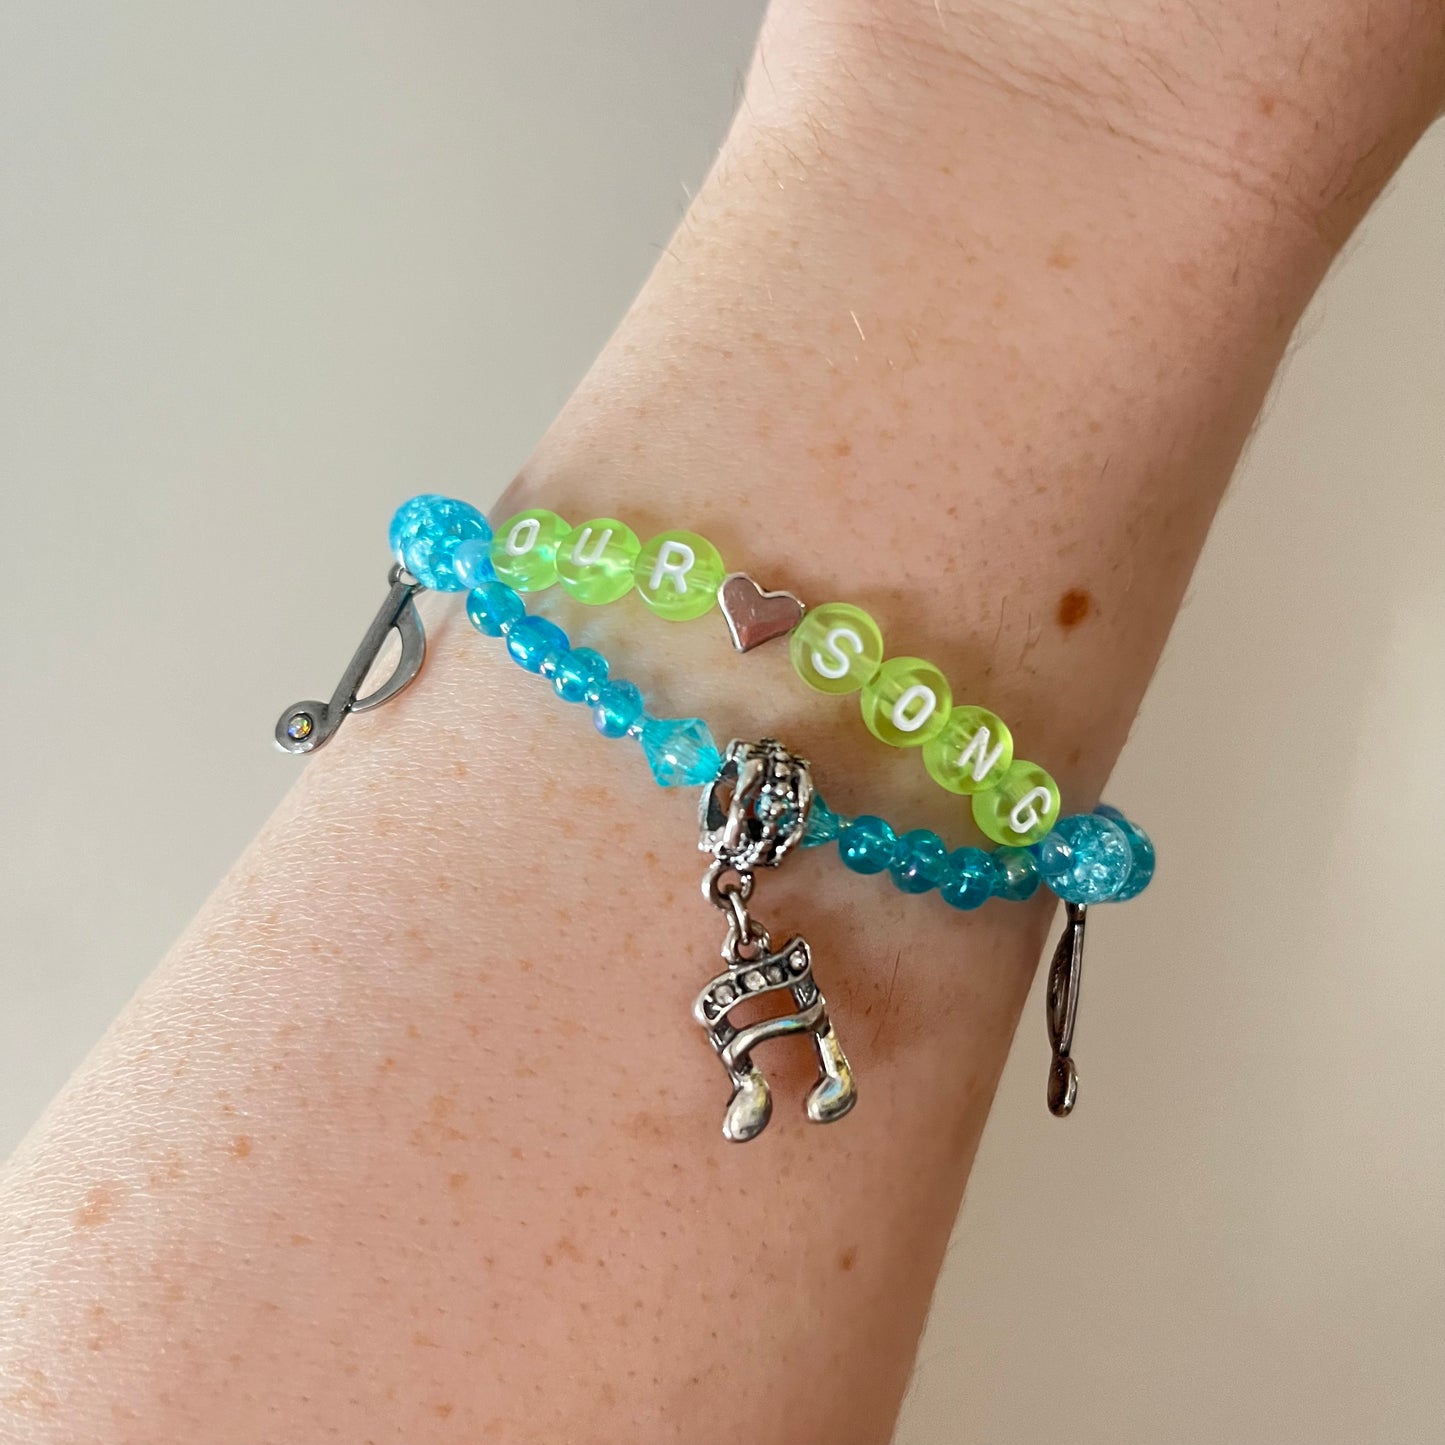 Our Song Bracelet